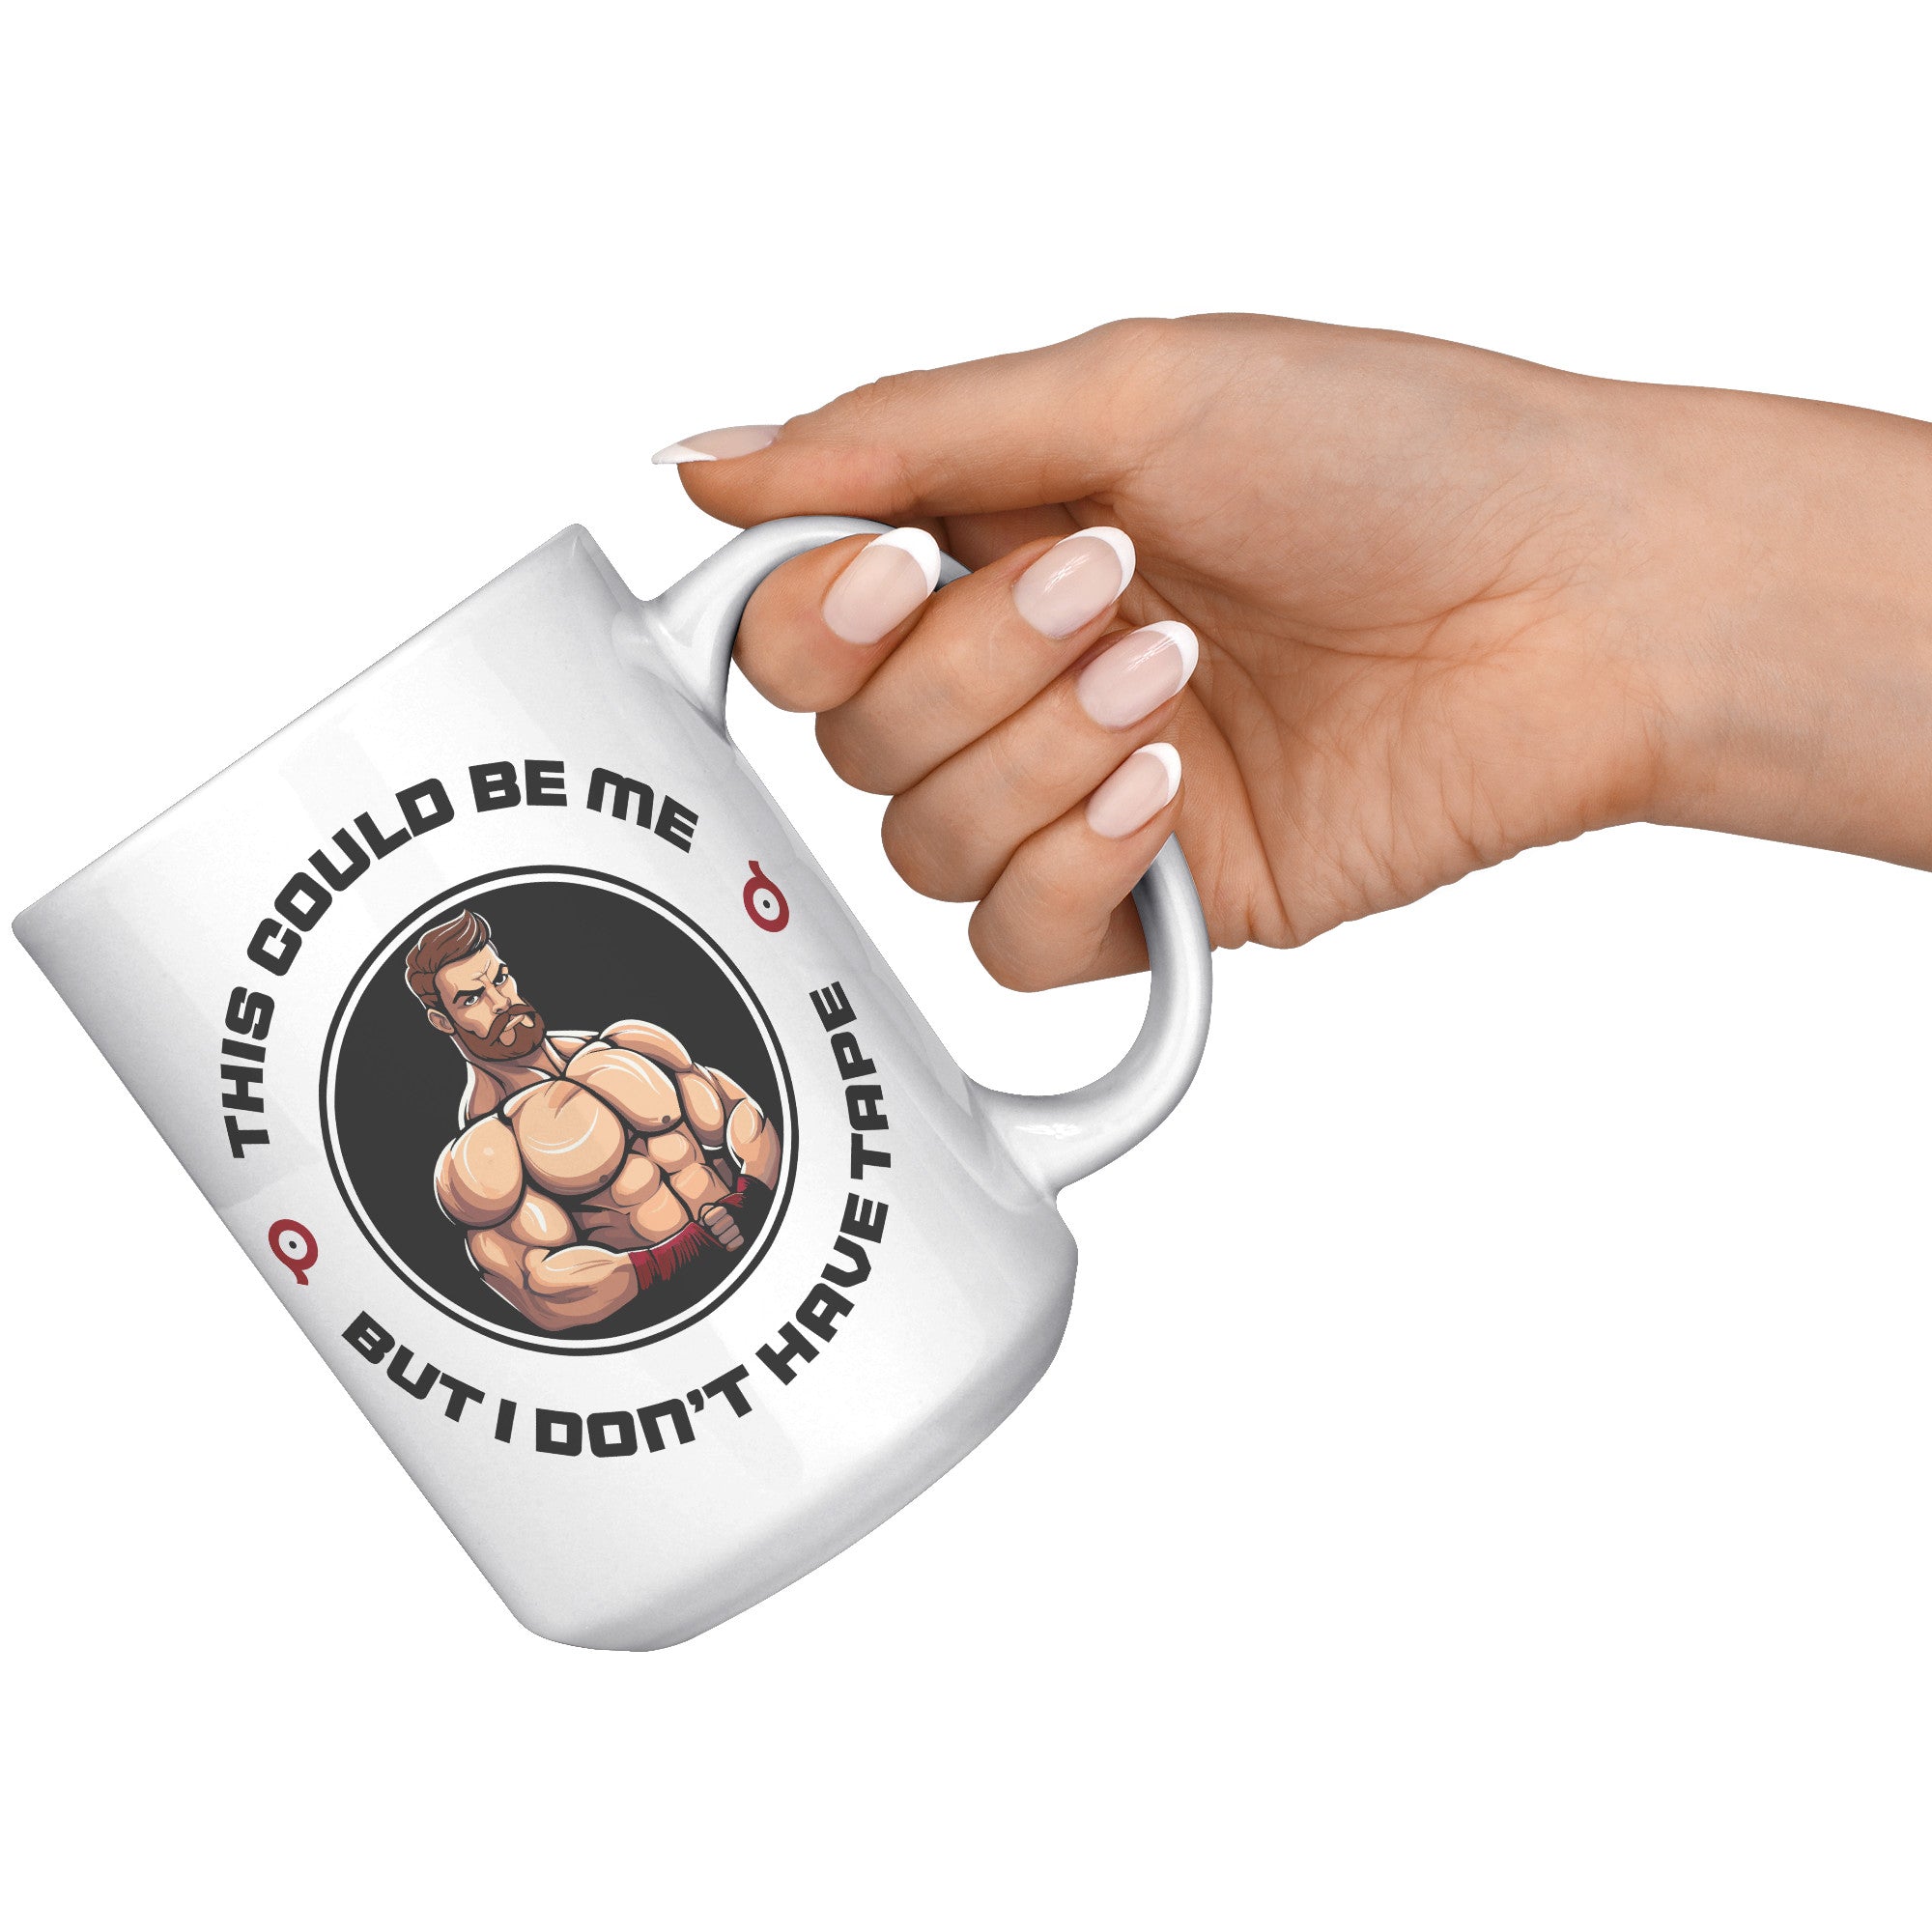 This Could Be Me But I Do Not Have Tape Mug